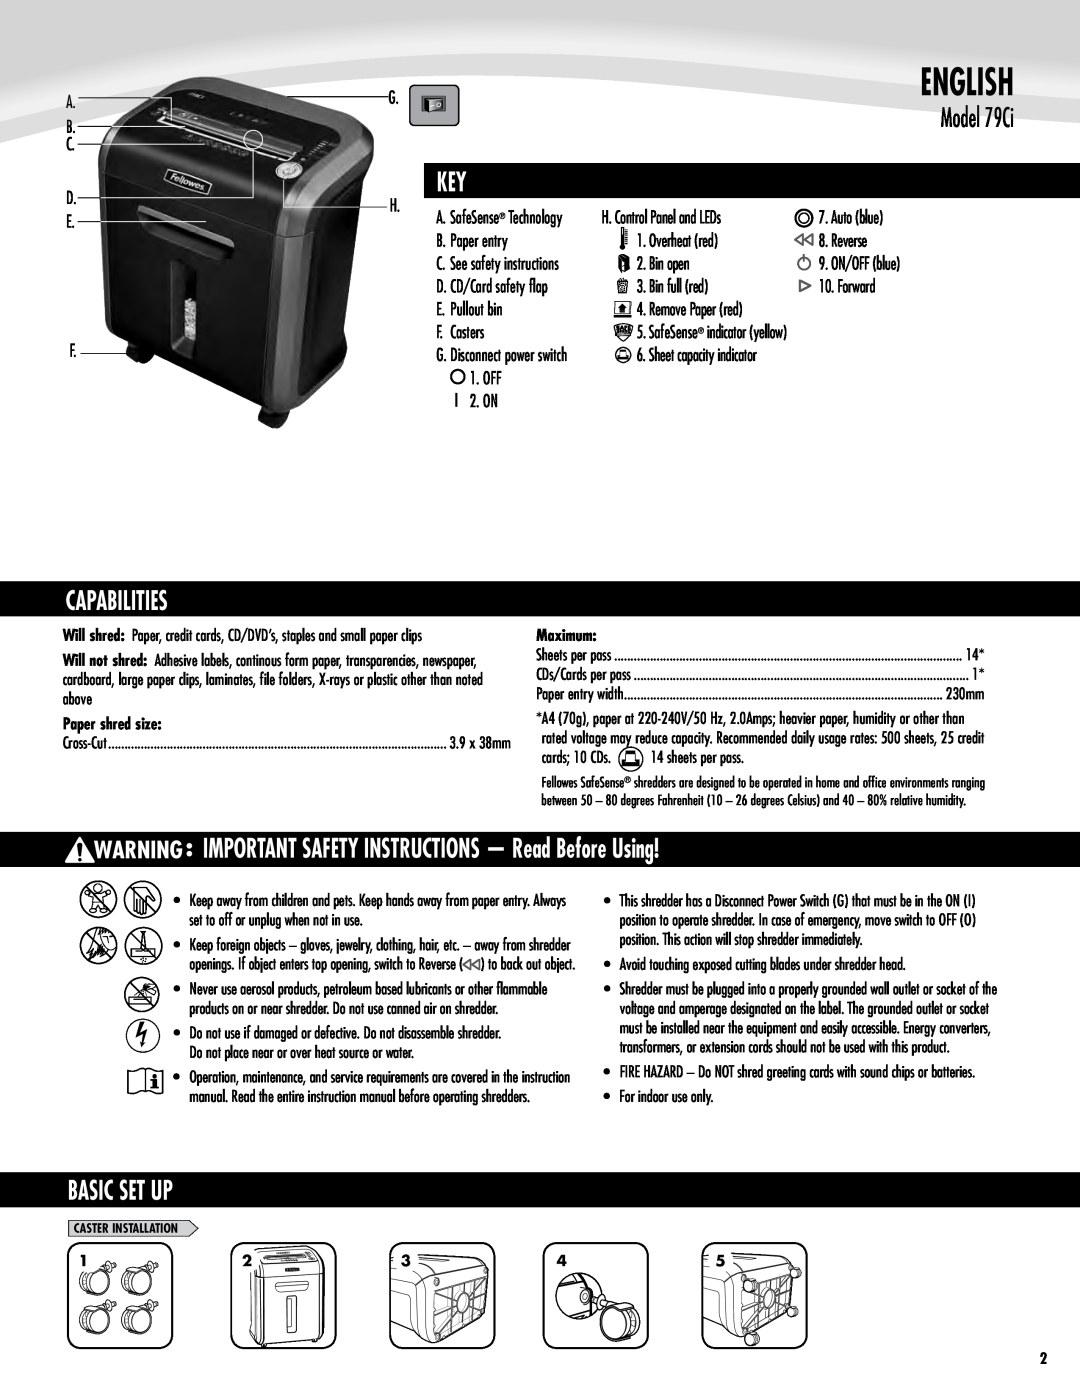 Fellowes manual English, Model 79Ci, Capabilities, IMPORTANT SAFETY INSTRUCTIONS - Read Before Using, Basic Set Up 